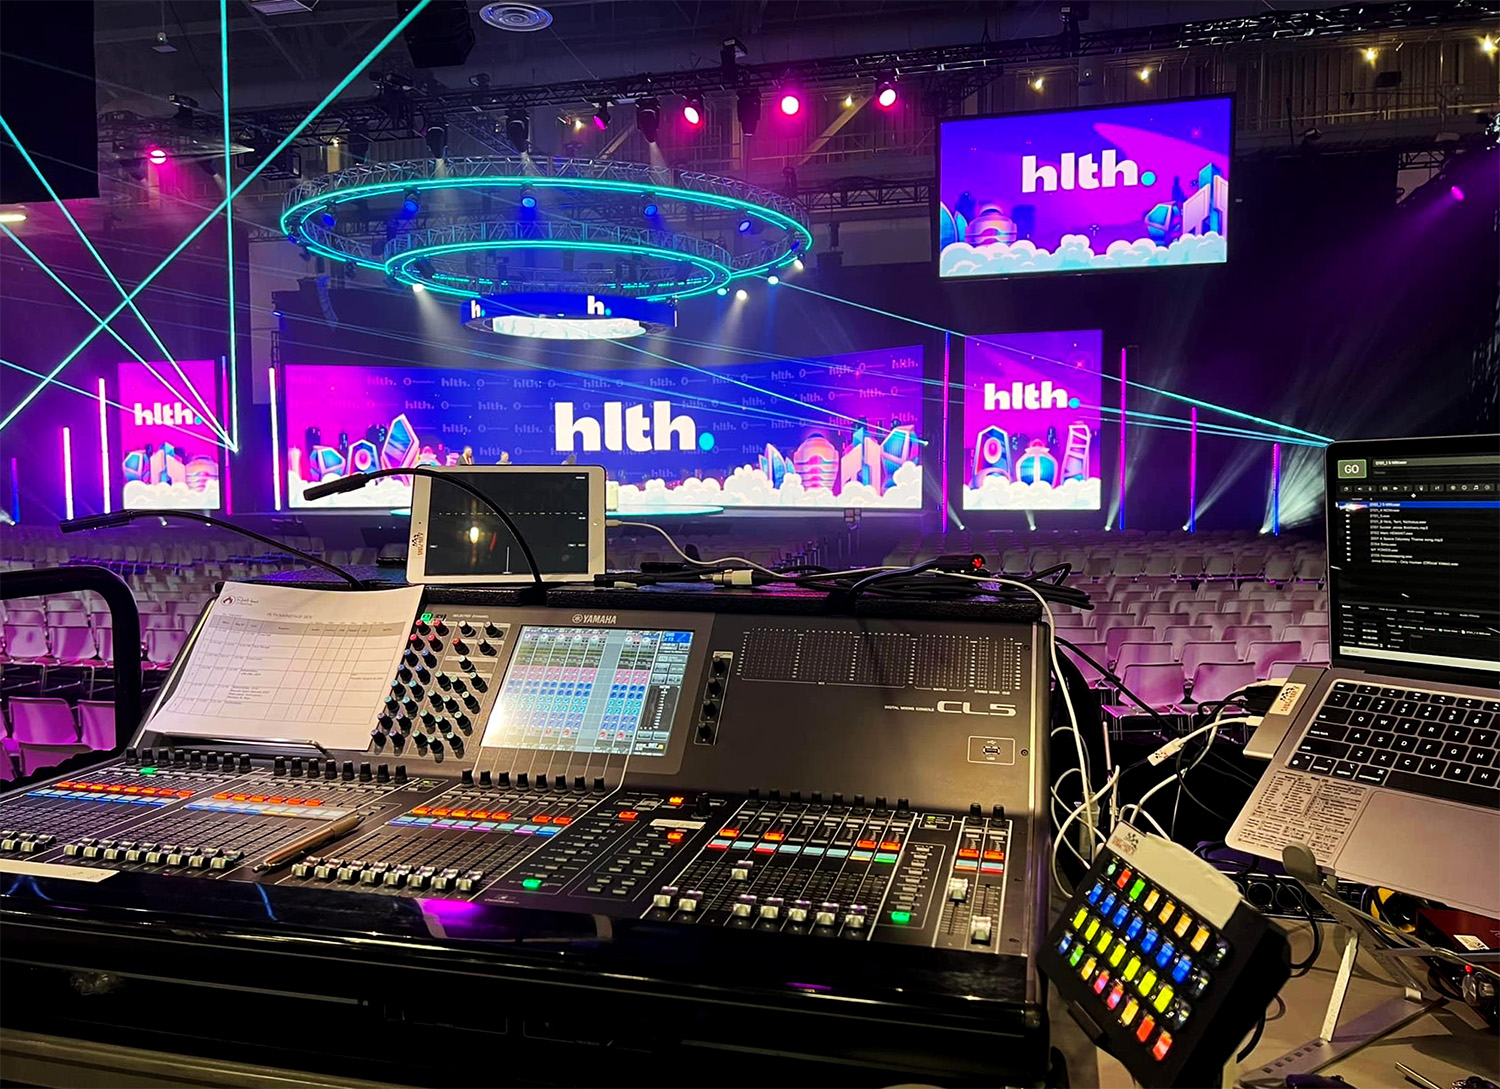 A sound and lighting control desk with a view of a stage and screens displaying 'hlth' branding, bathed in vibrant stage lighting.